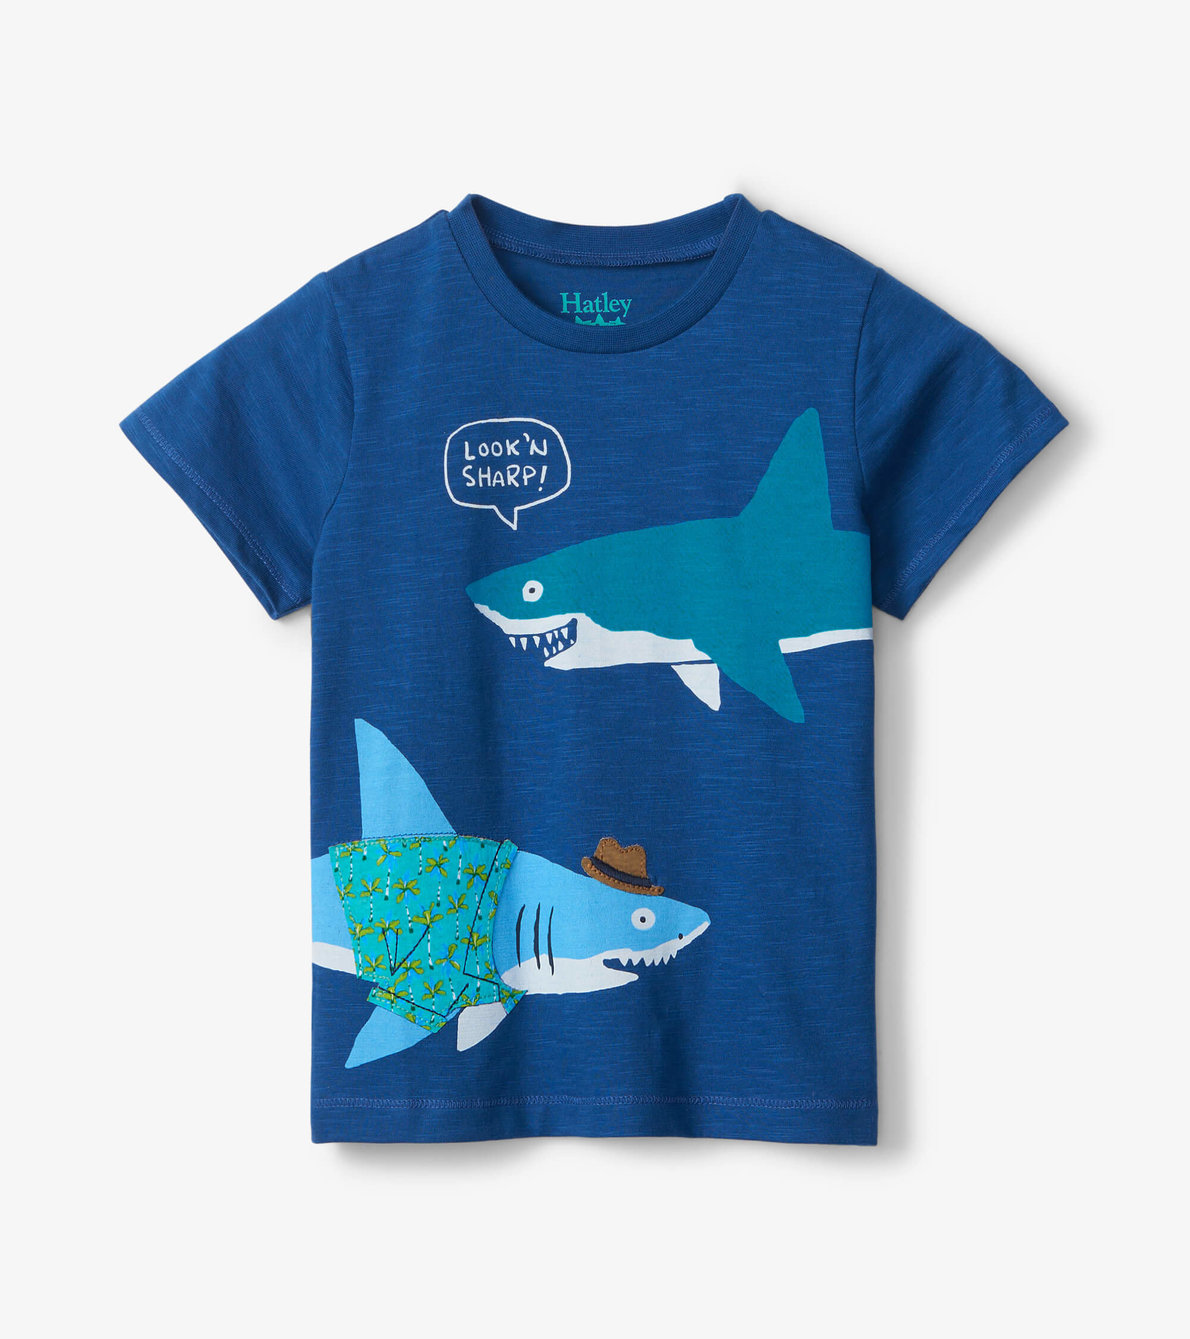 View larger image of Look’N Sharp Toddler Graphic Tee